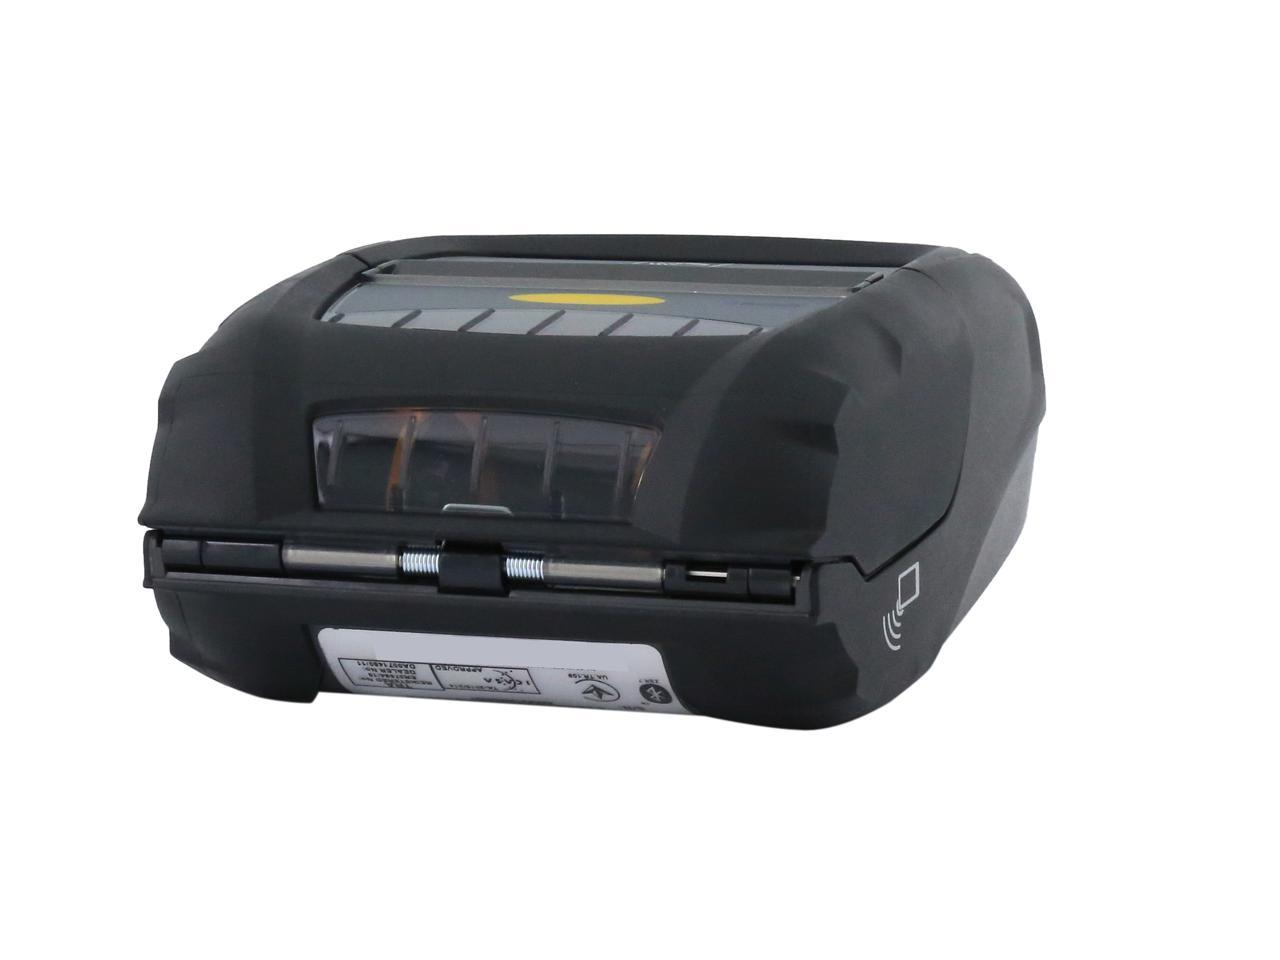 Zebra Zq510 3 Mobile Direct Thermal Receipt And Label Printer 203 Dpi Bluetooth 40 Linered 7330